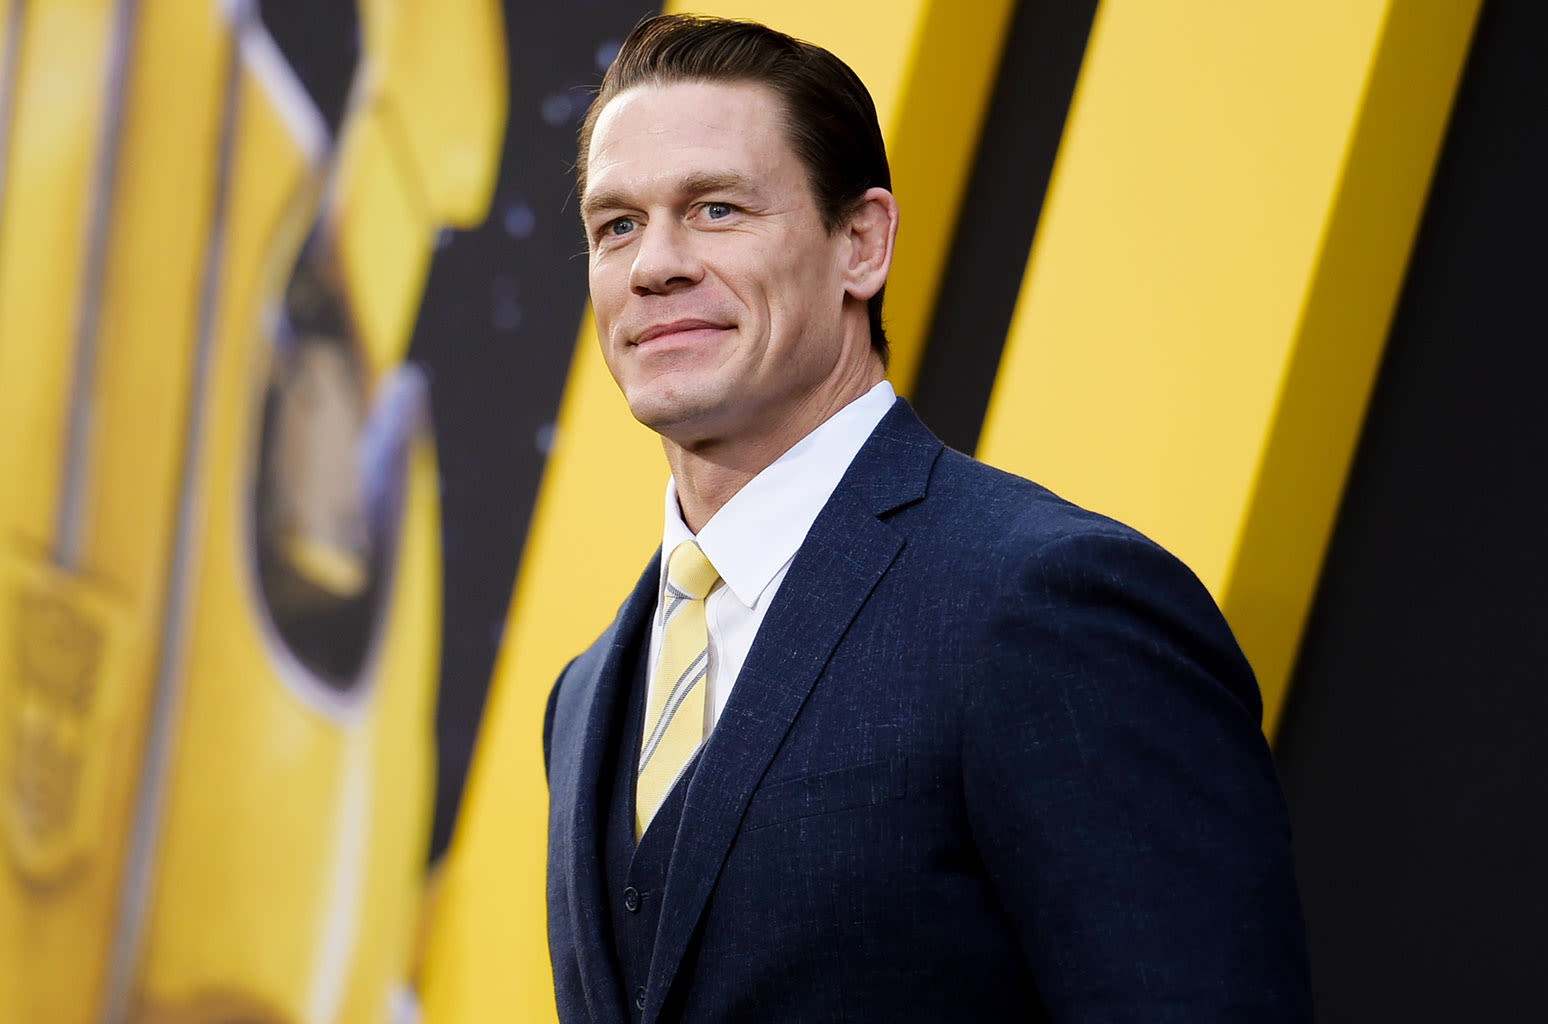 John Cena Dives Into ‘Shark Week’ After WWE Retirement Announcement: How to Watch the Show Online Without Cable